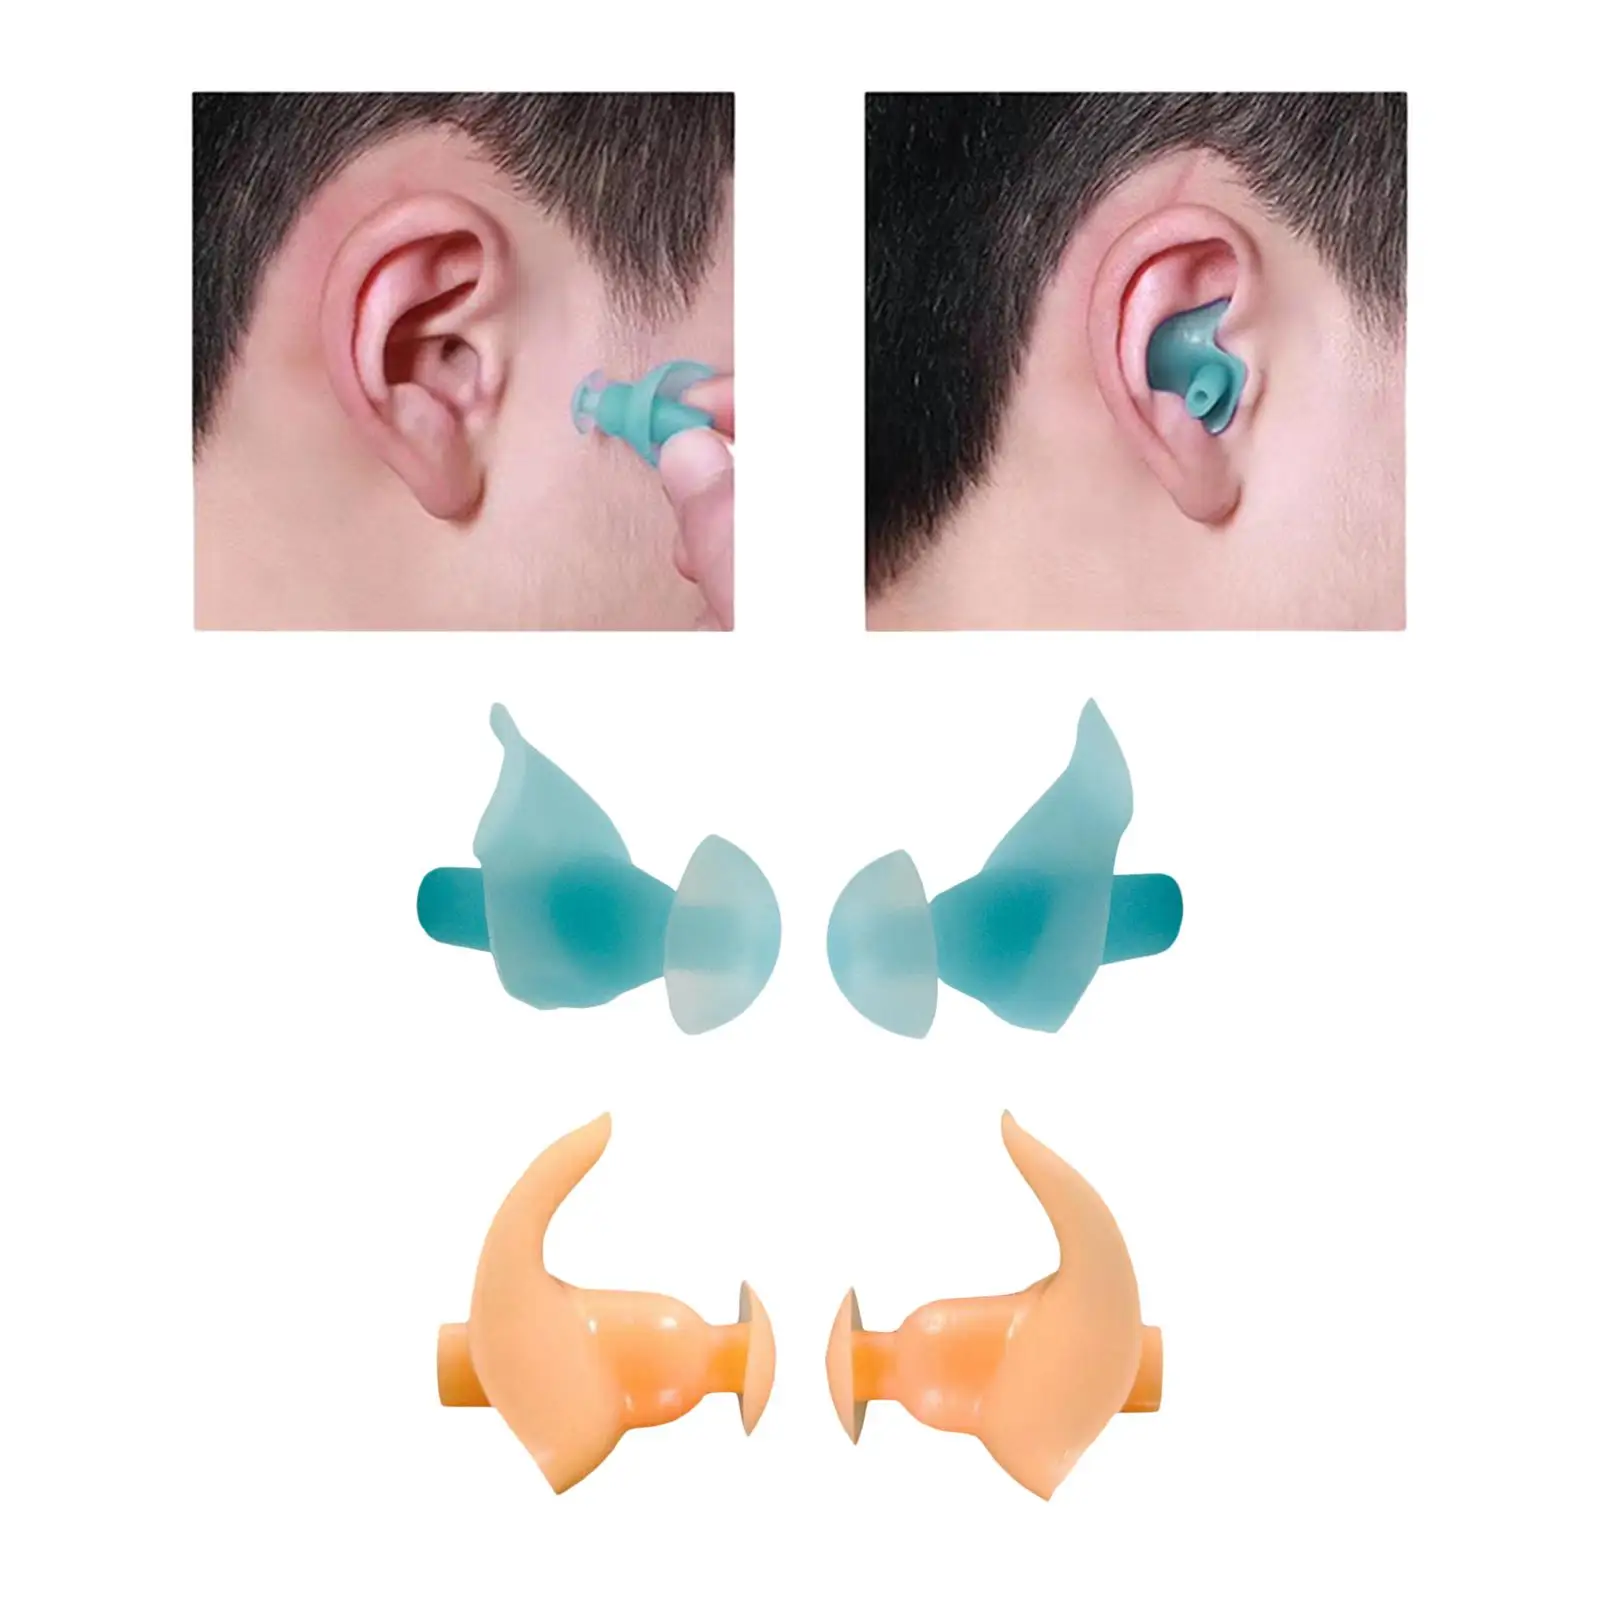 Soft Silicone EarSwimming Waterproof Reusable Professional Anti Noise Earfor Water Sports Bathing Outdoor